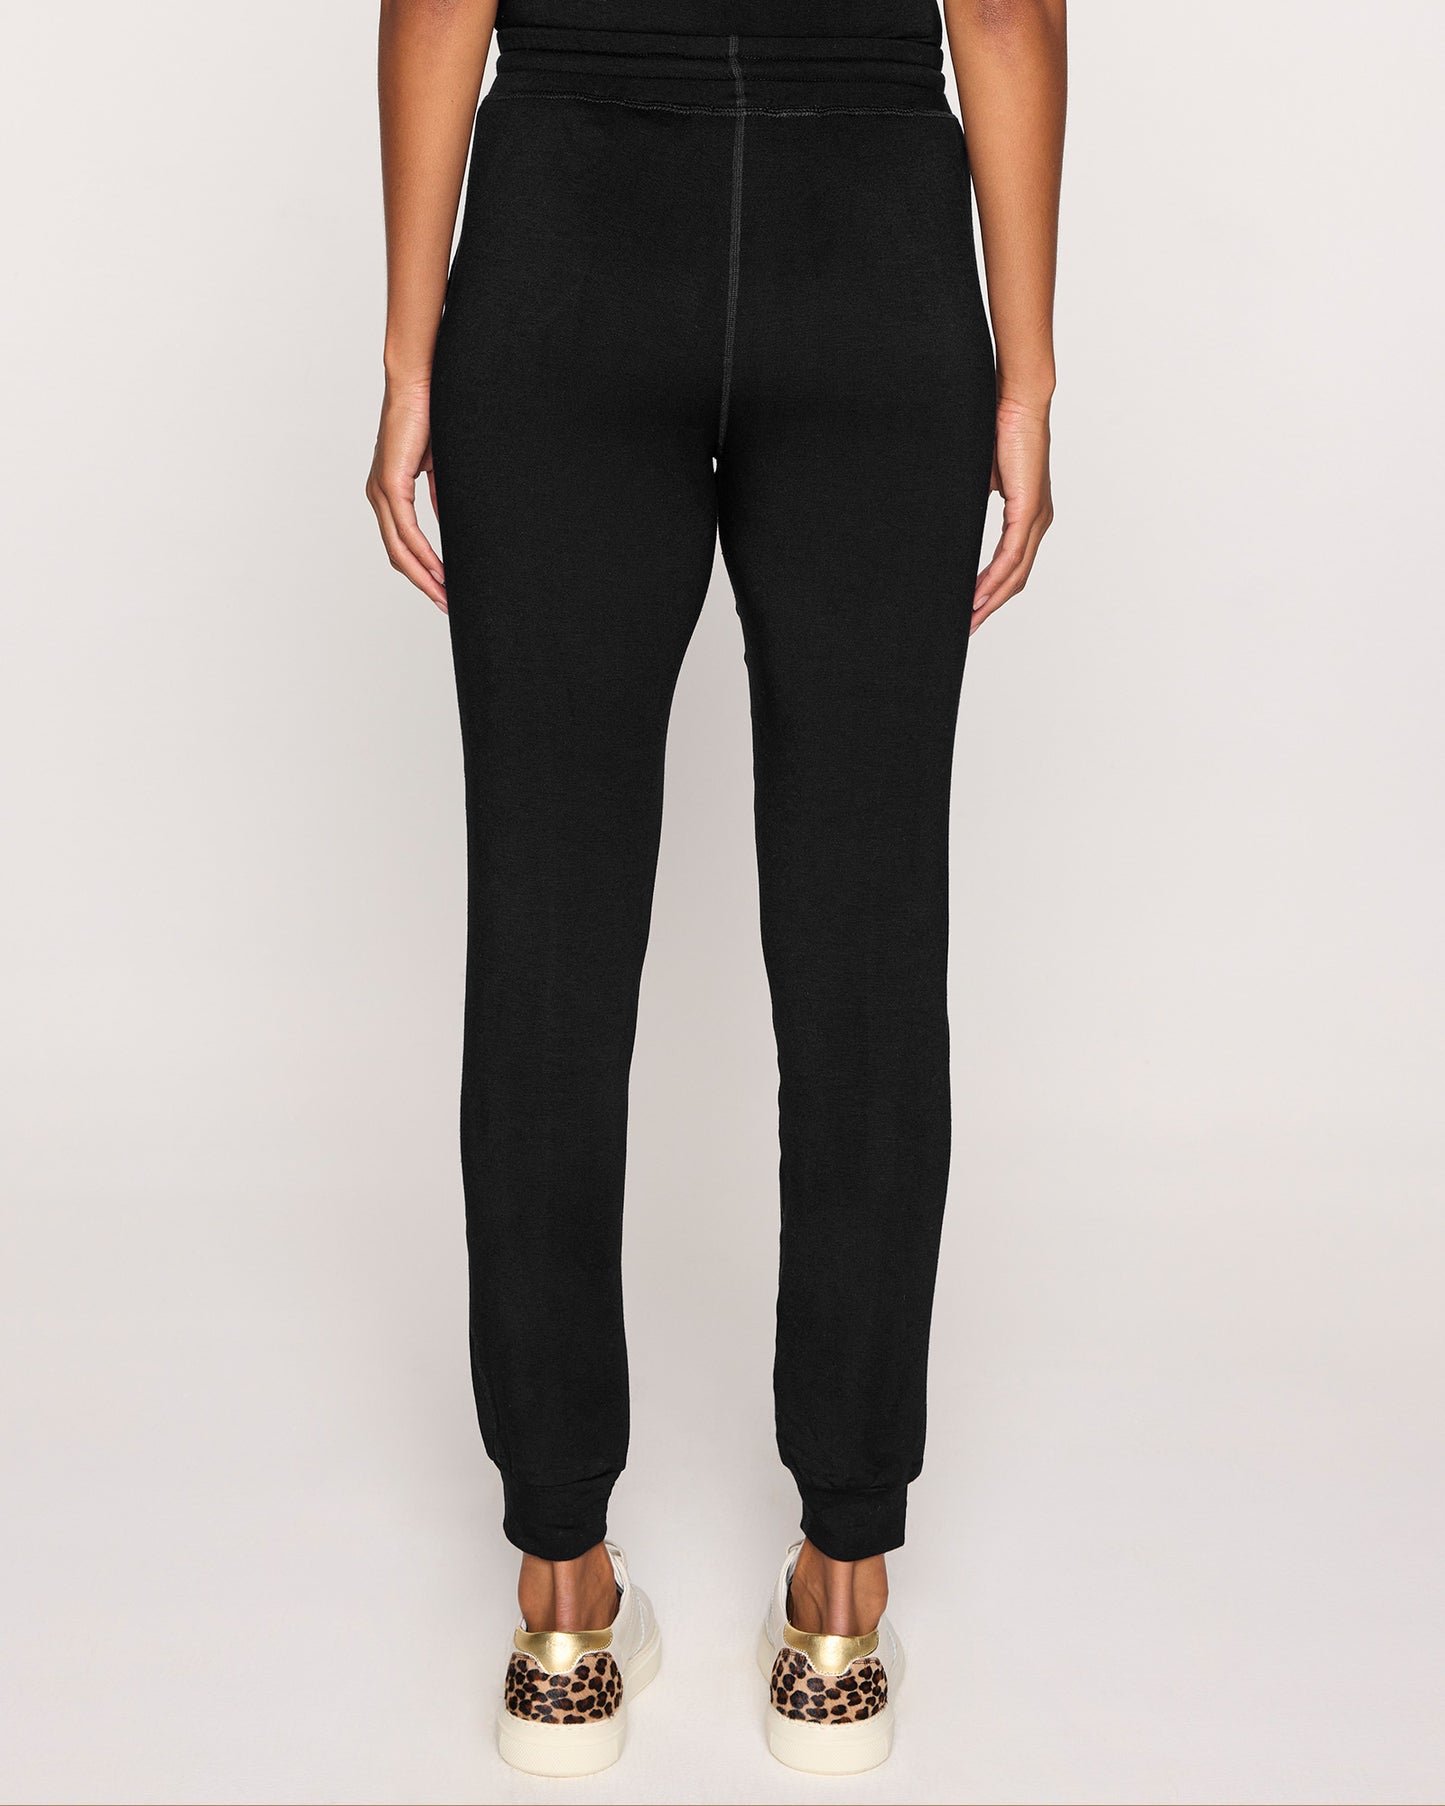 Black | The Women's Elevated Jogger Back